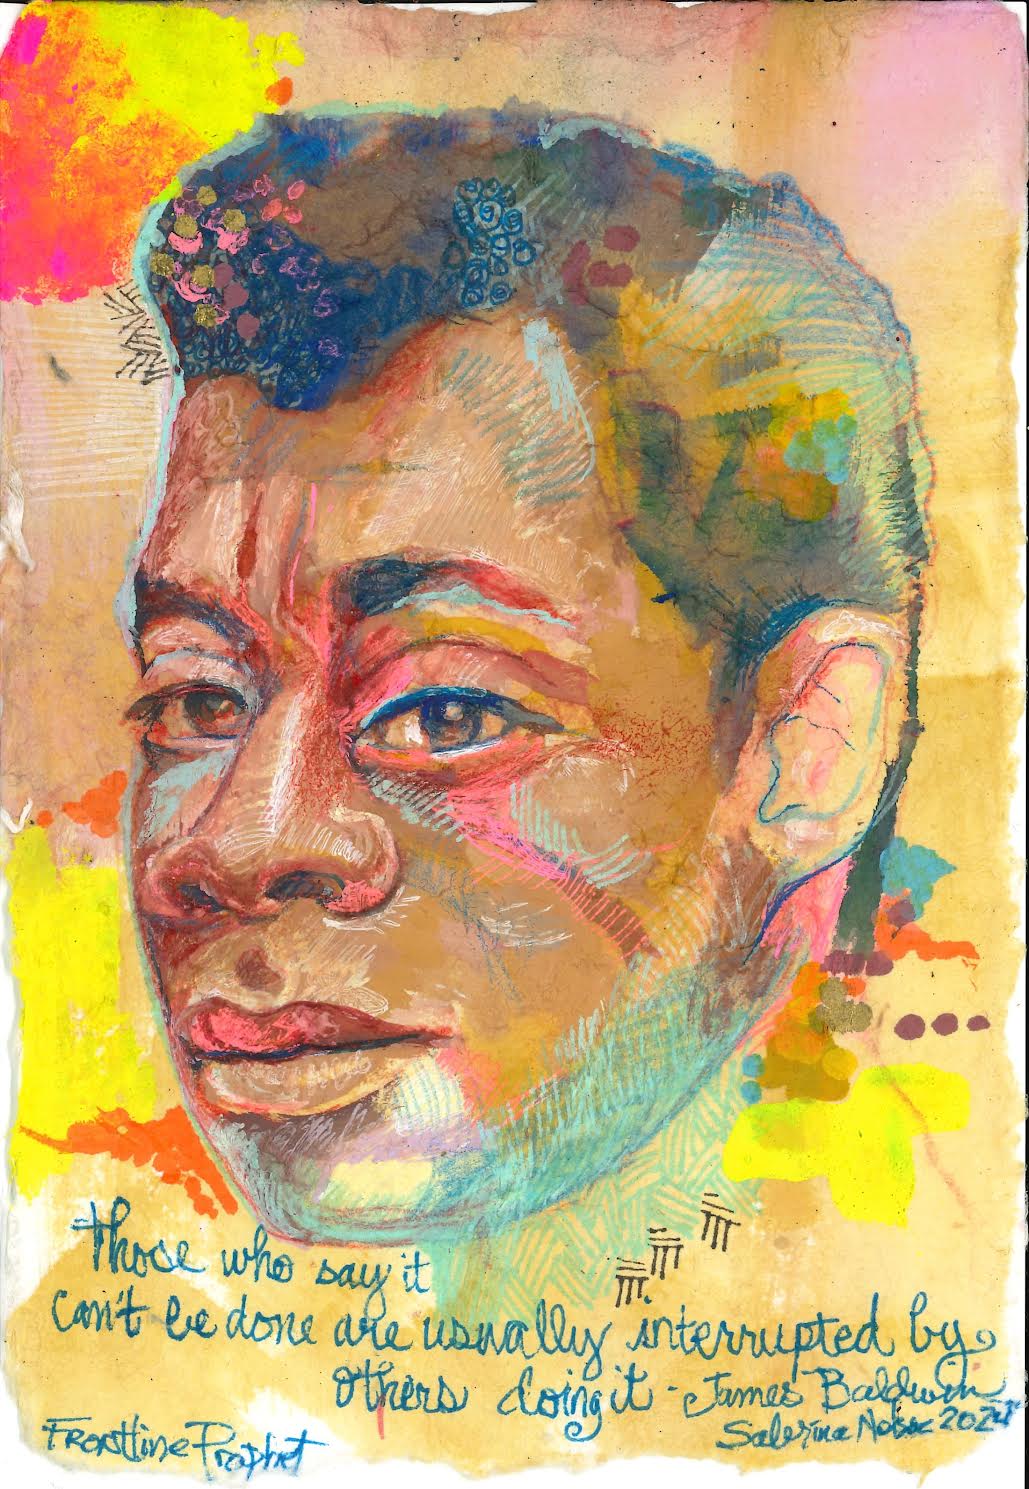 A stoic yet colorful portrait of James Baldwin starring straight ahead.